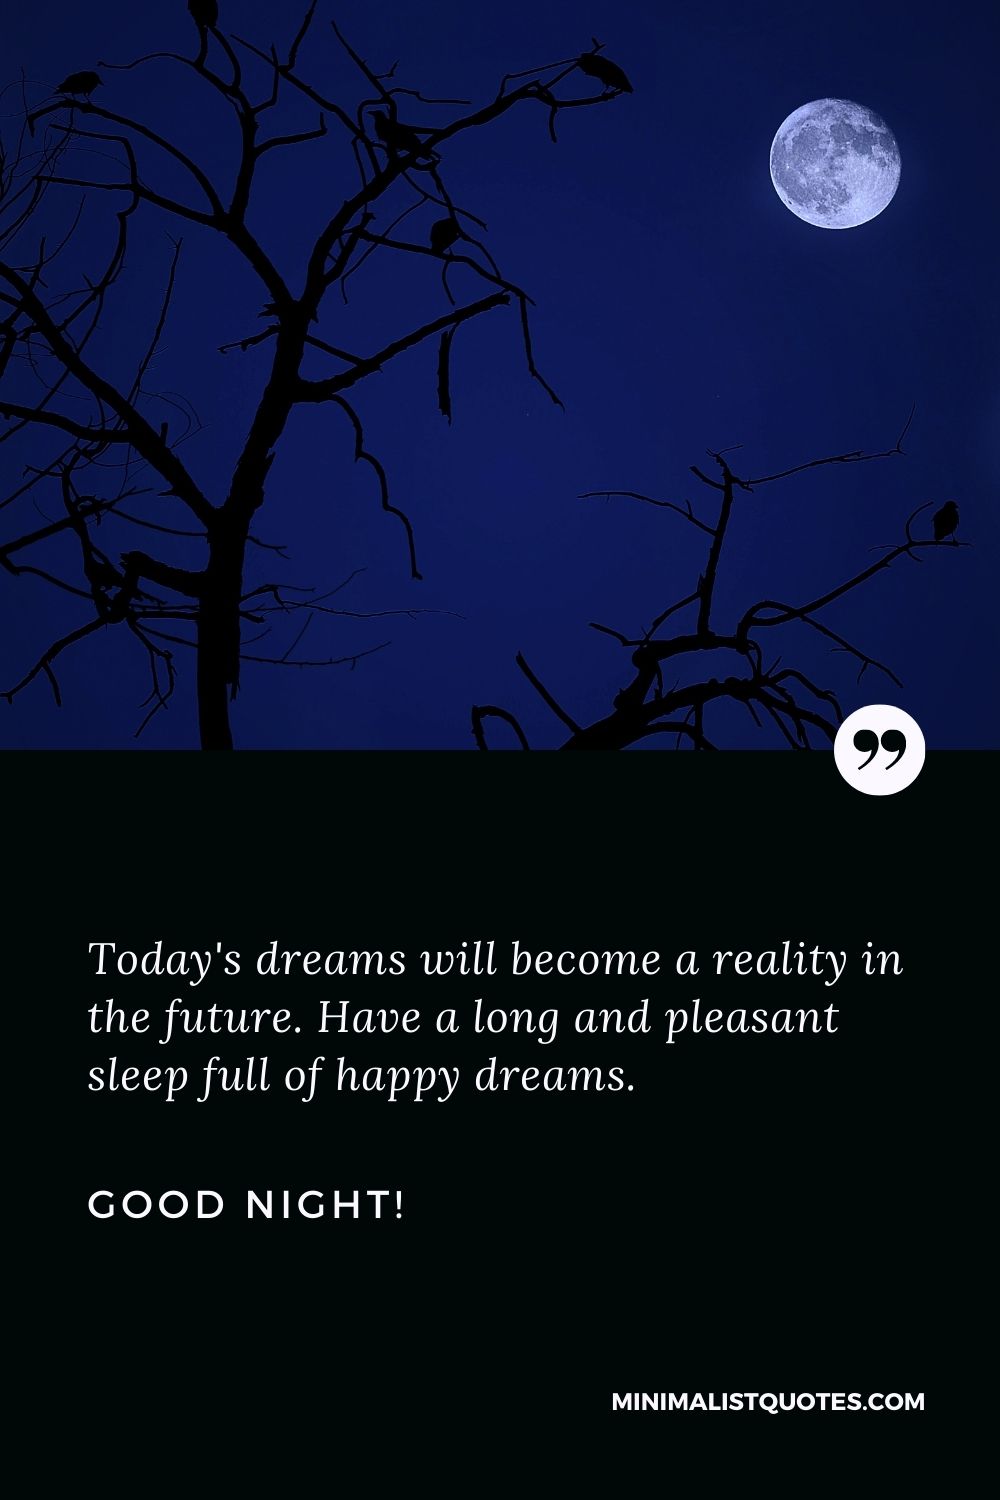 Good night friends: Today's dreams will become a reality in the future. Have a long and pleasant sleep full of happy dreams. Good Night!